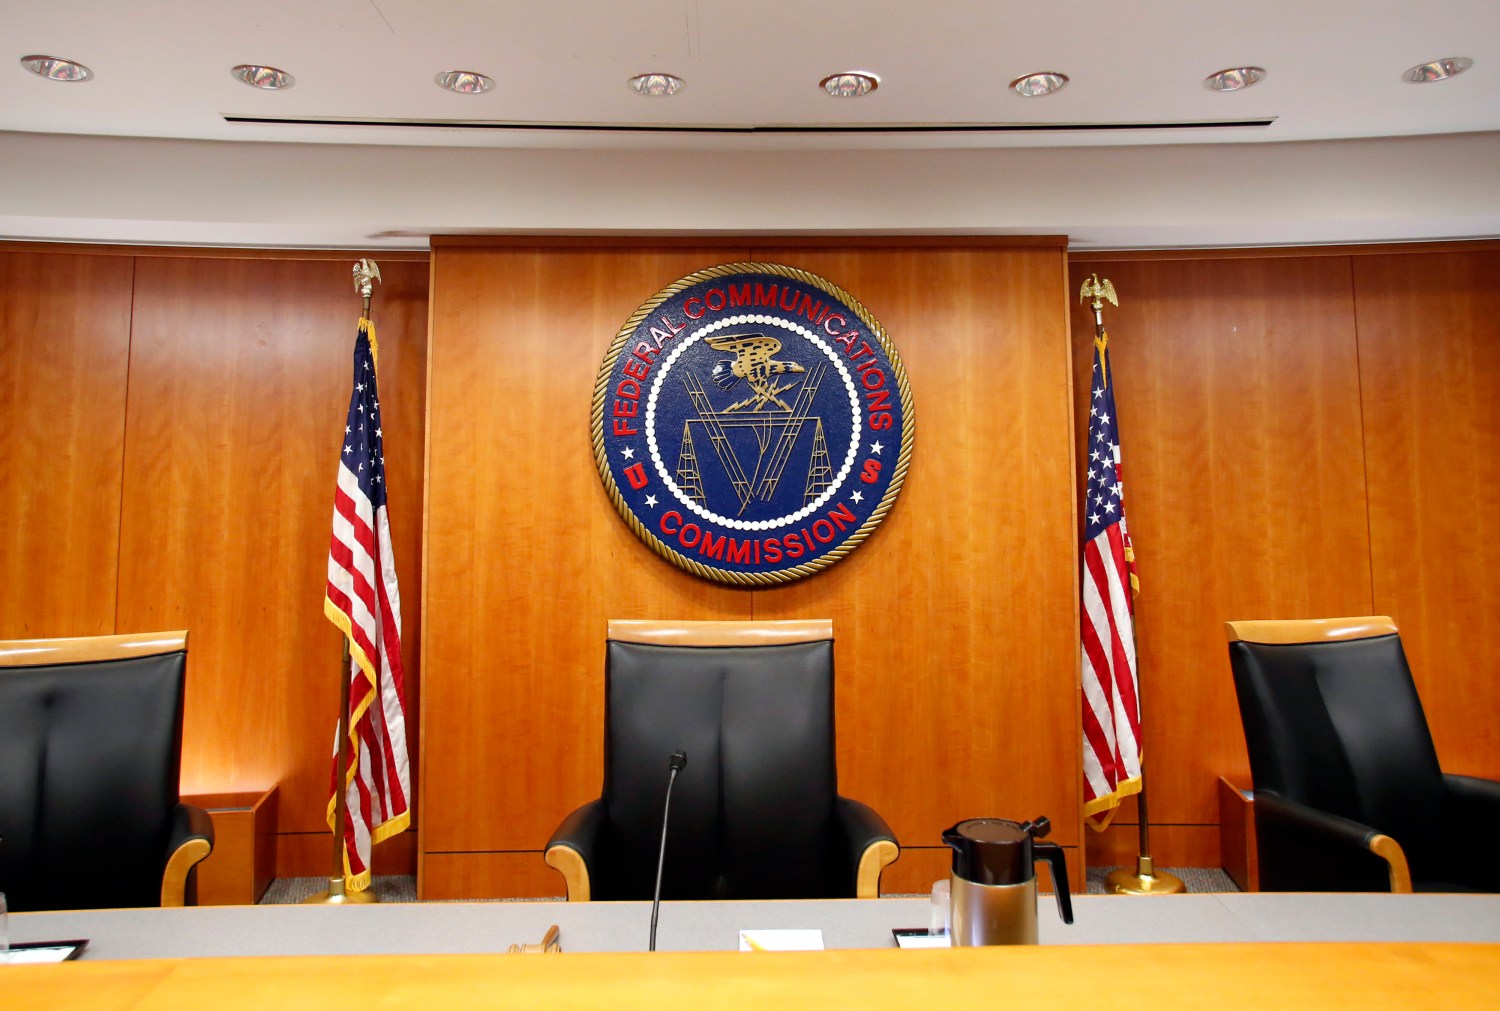 Federal Communications Commission (FCC) hearing room